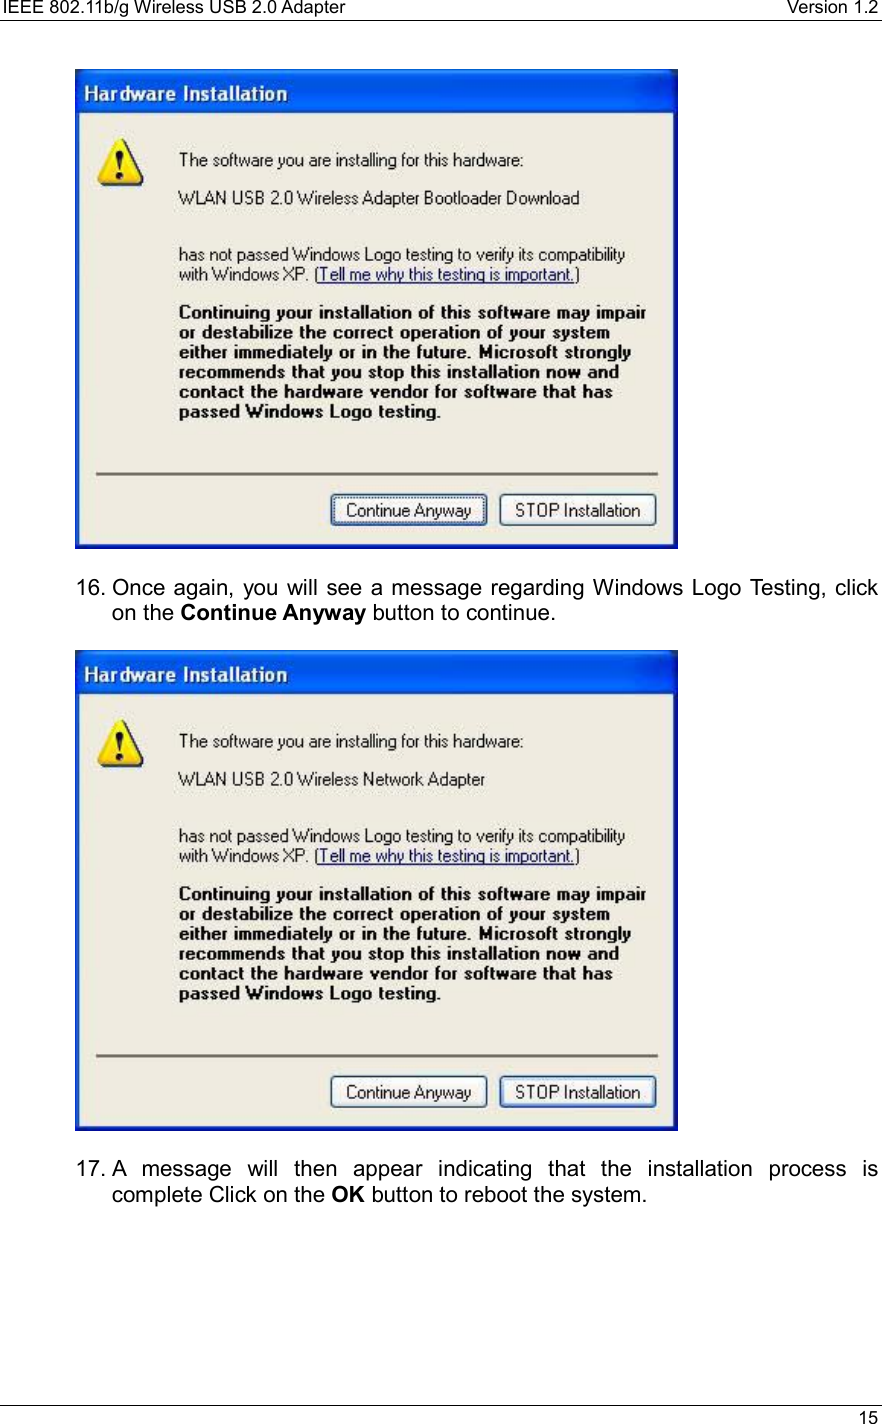 IEEE 802.11b/g Wireless USB 2.0 Adapter    Version 1.2   15    16. Once again, you will see a message regarding Windows Logo Testing, click on the Continue Anyway button to continue.    17. A message will then appear indicating that the installation process is complete Click on the OK button to reboot the system.      